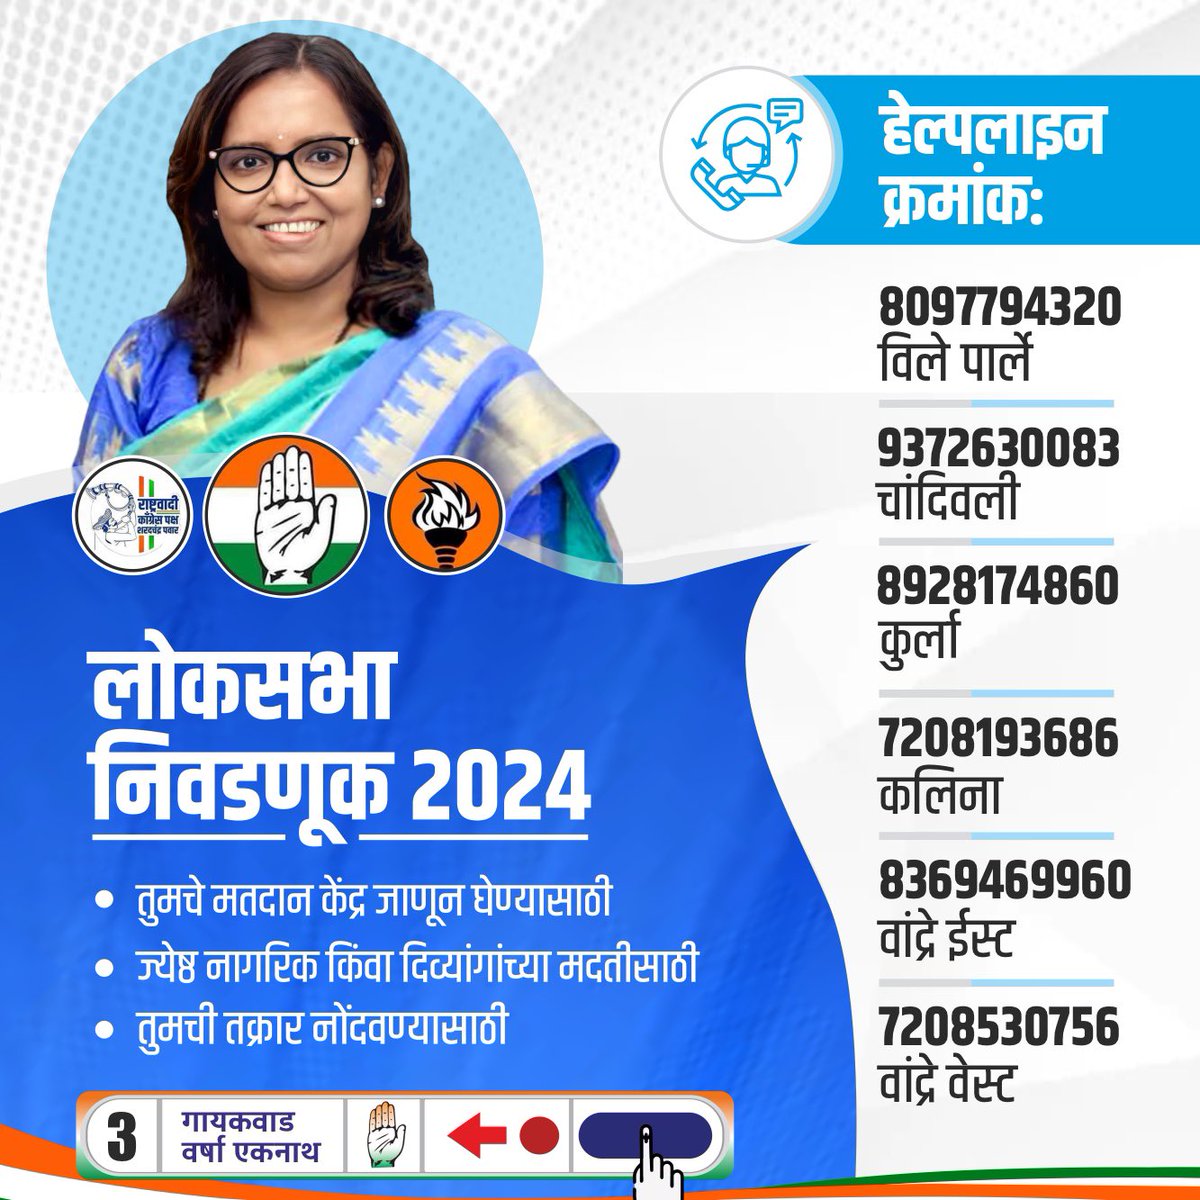 Providing helpline numbers for each assembly, @VarshaEGaikwad renowned for her exemplary track record as an MLA in resolving constituents' concerns. With a reputation for accessibility, she consistently demonstrates her commitment to serving the people. Varsha ji's dedication…